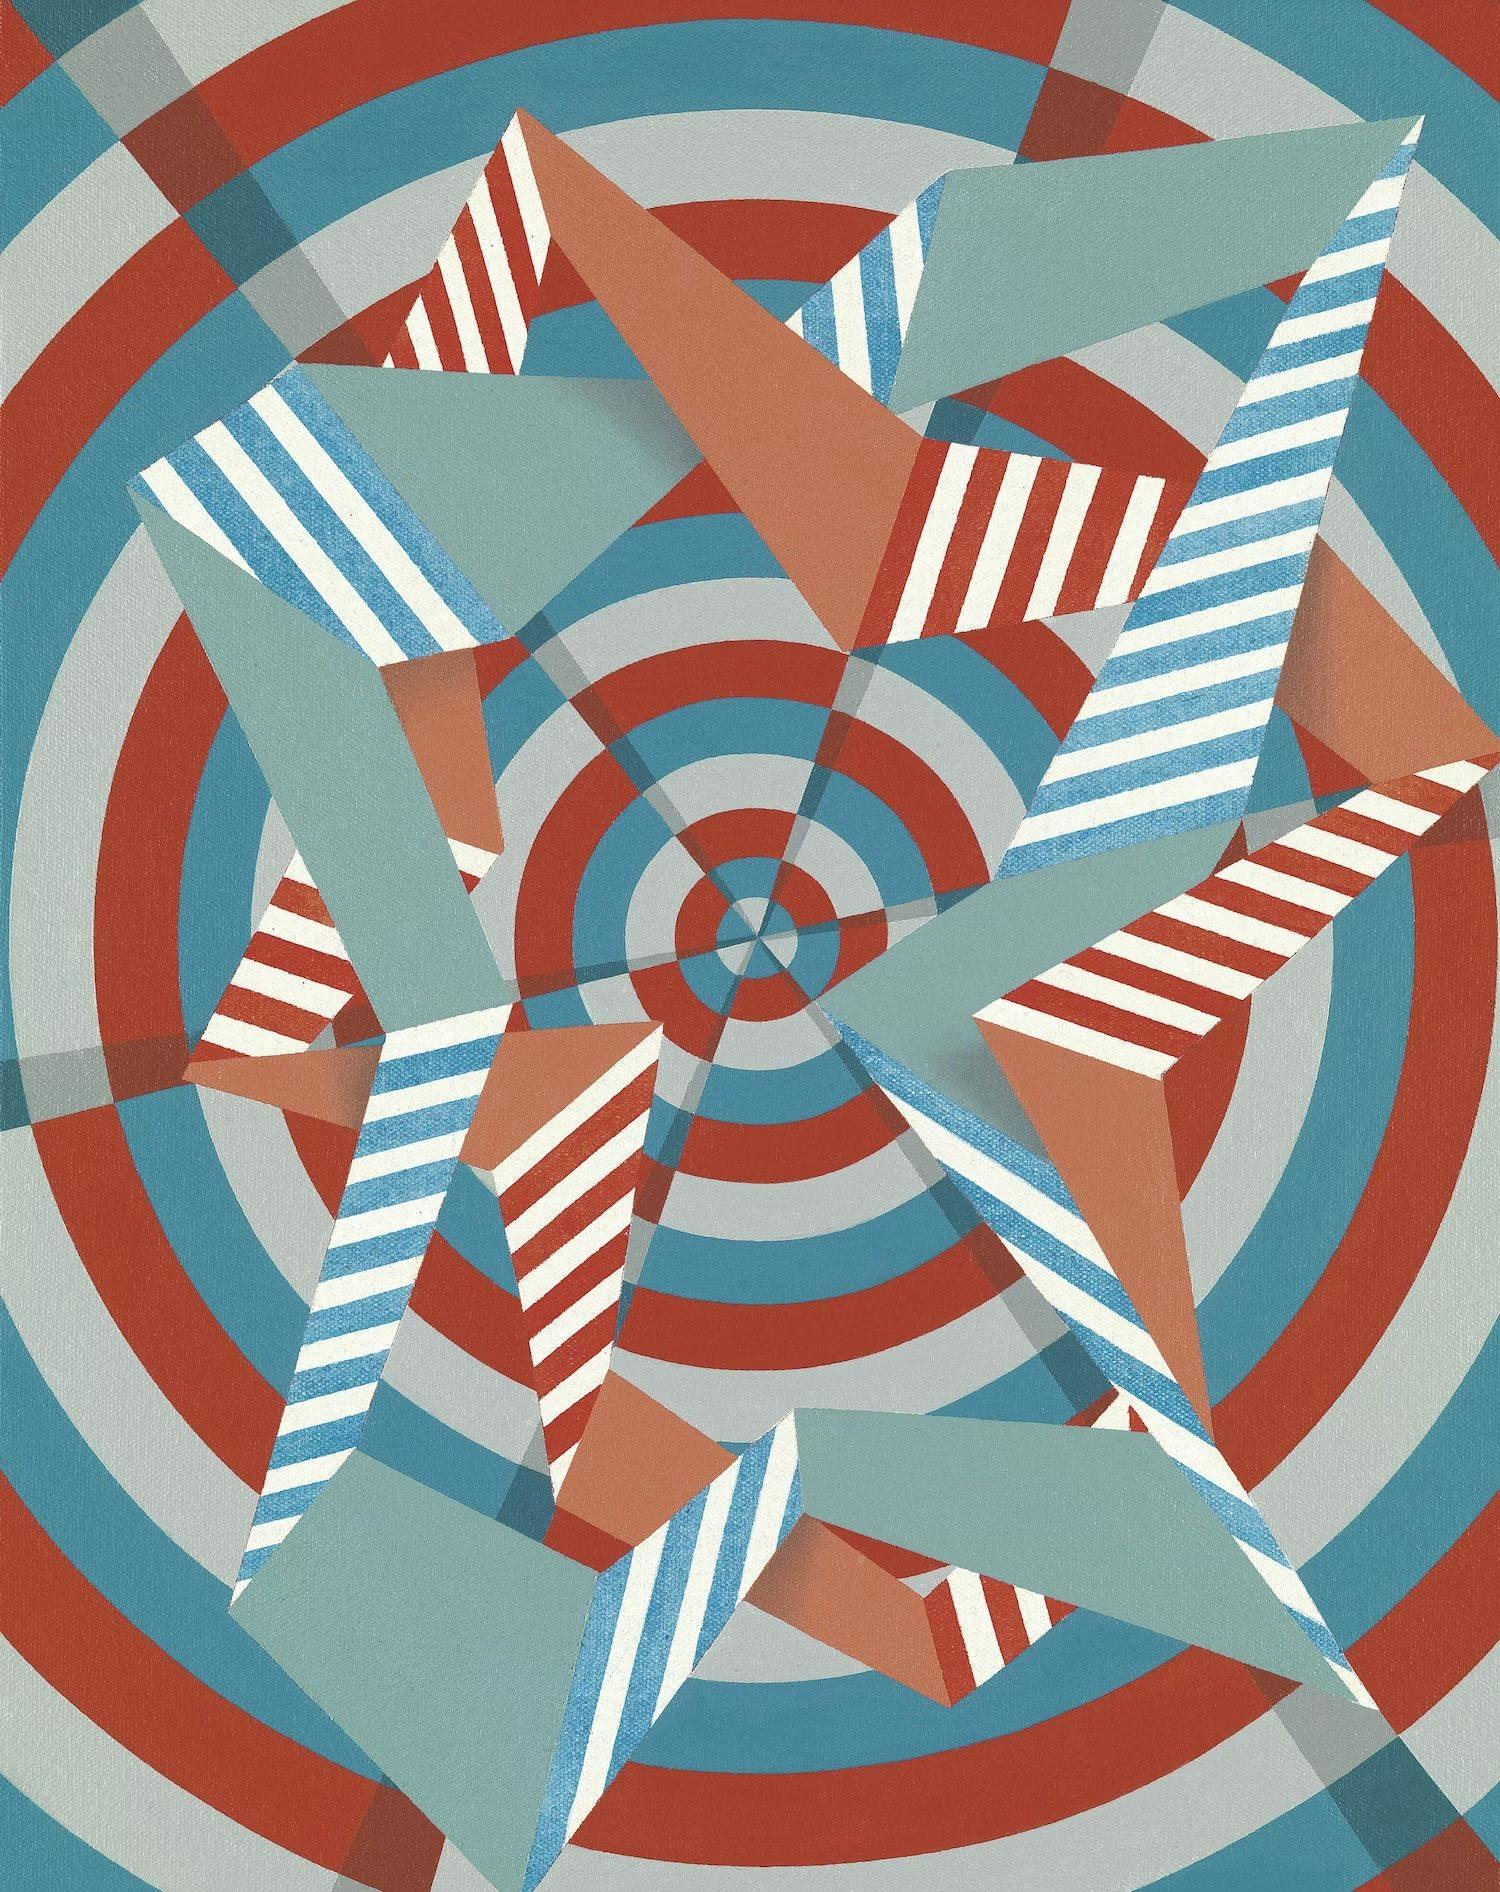 A painting by Tomma Abts, titled Fimme, from the collection of Sascha S. Bauer, dated 2013.